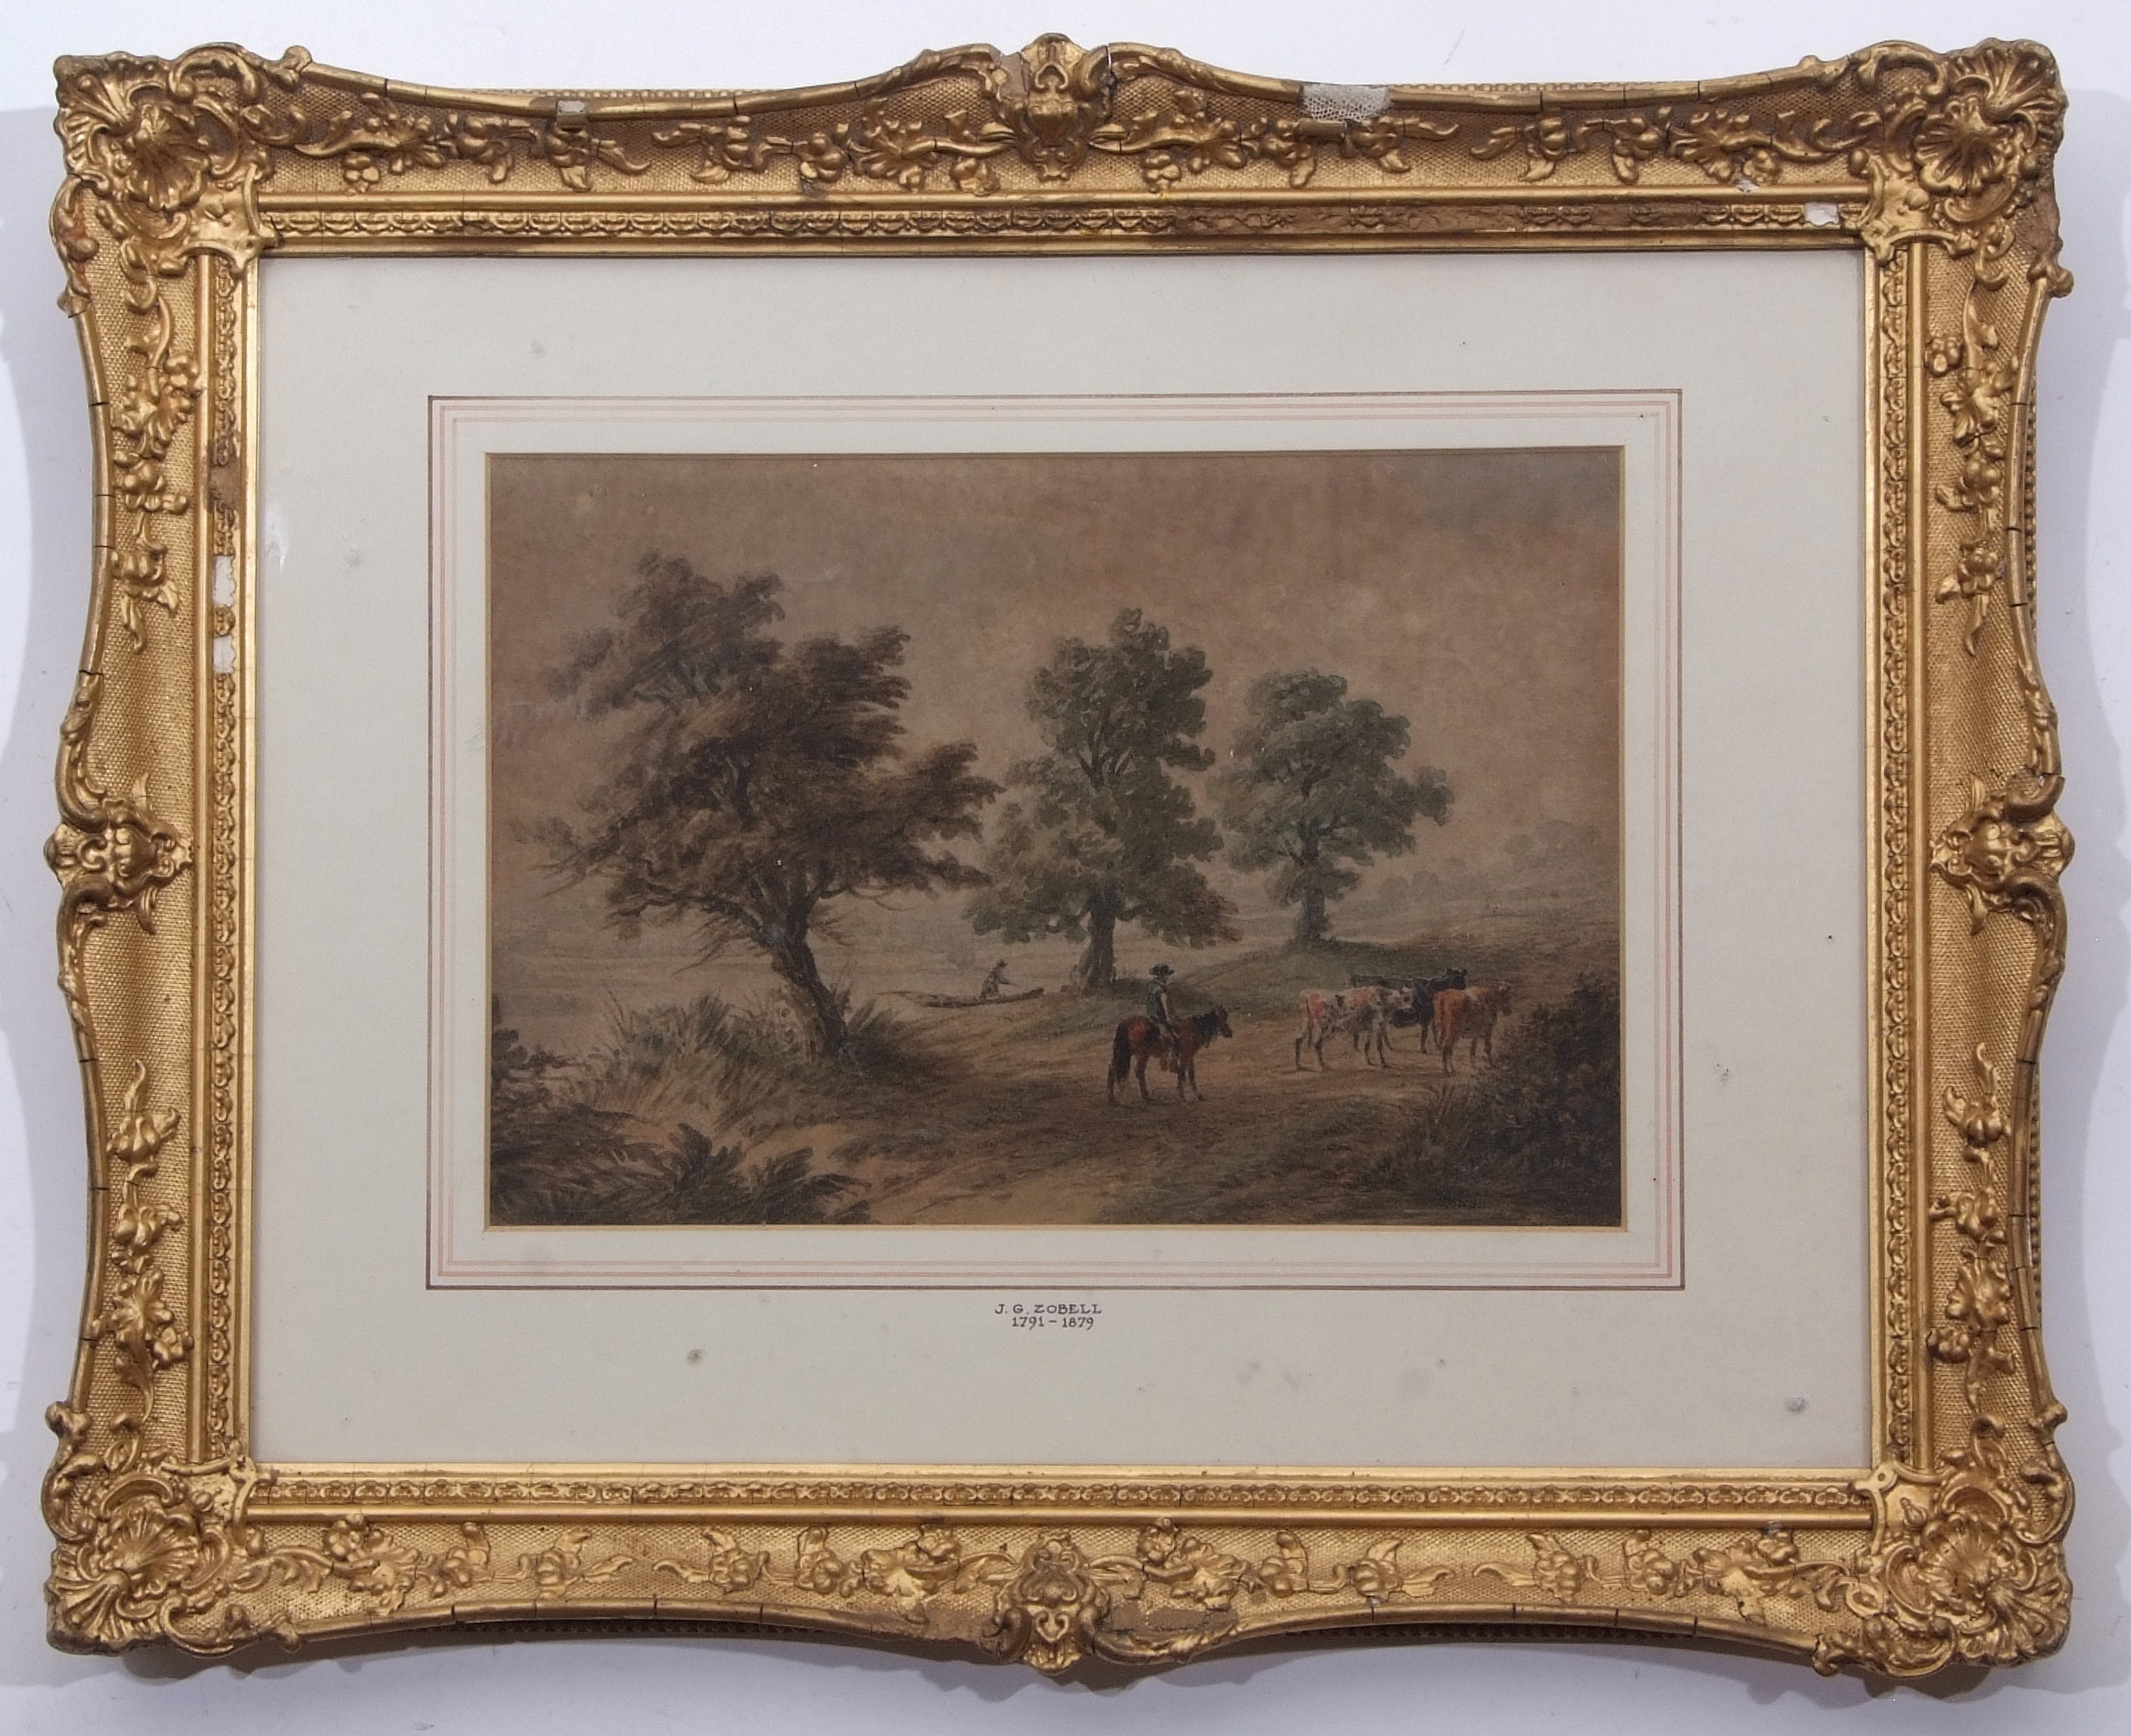 JAMES GEORGE ZOBELL (1791-1879) Country scene with figure on horse with cattle watercolour 20 x 29cm - Image 2 of 2